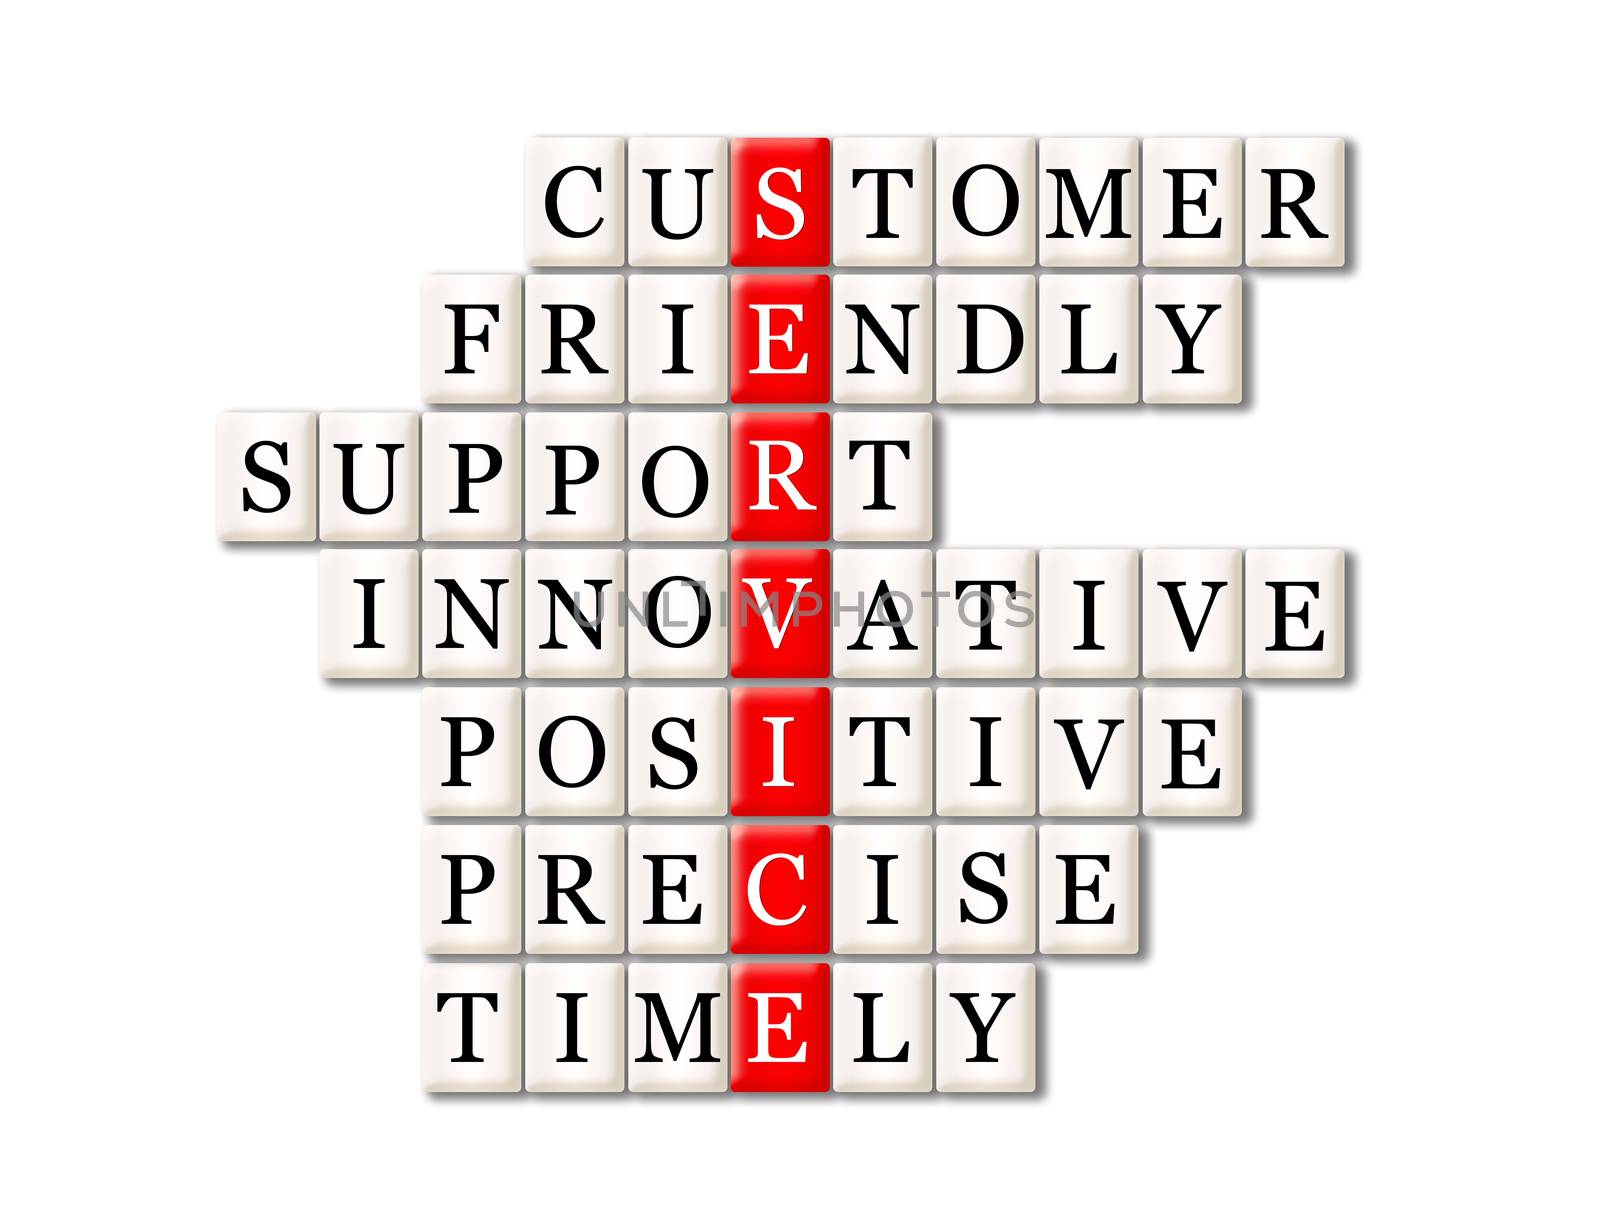 customer service concept -customer friendly support,innovative,positive ,precise ,timely